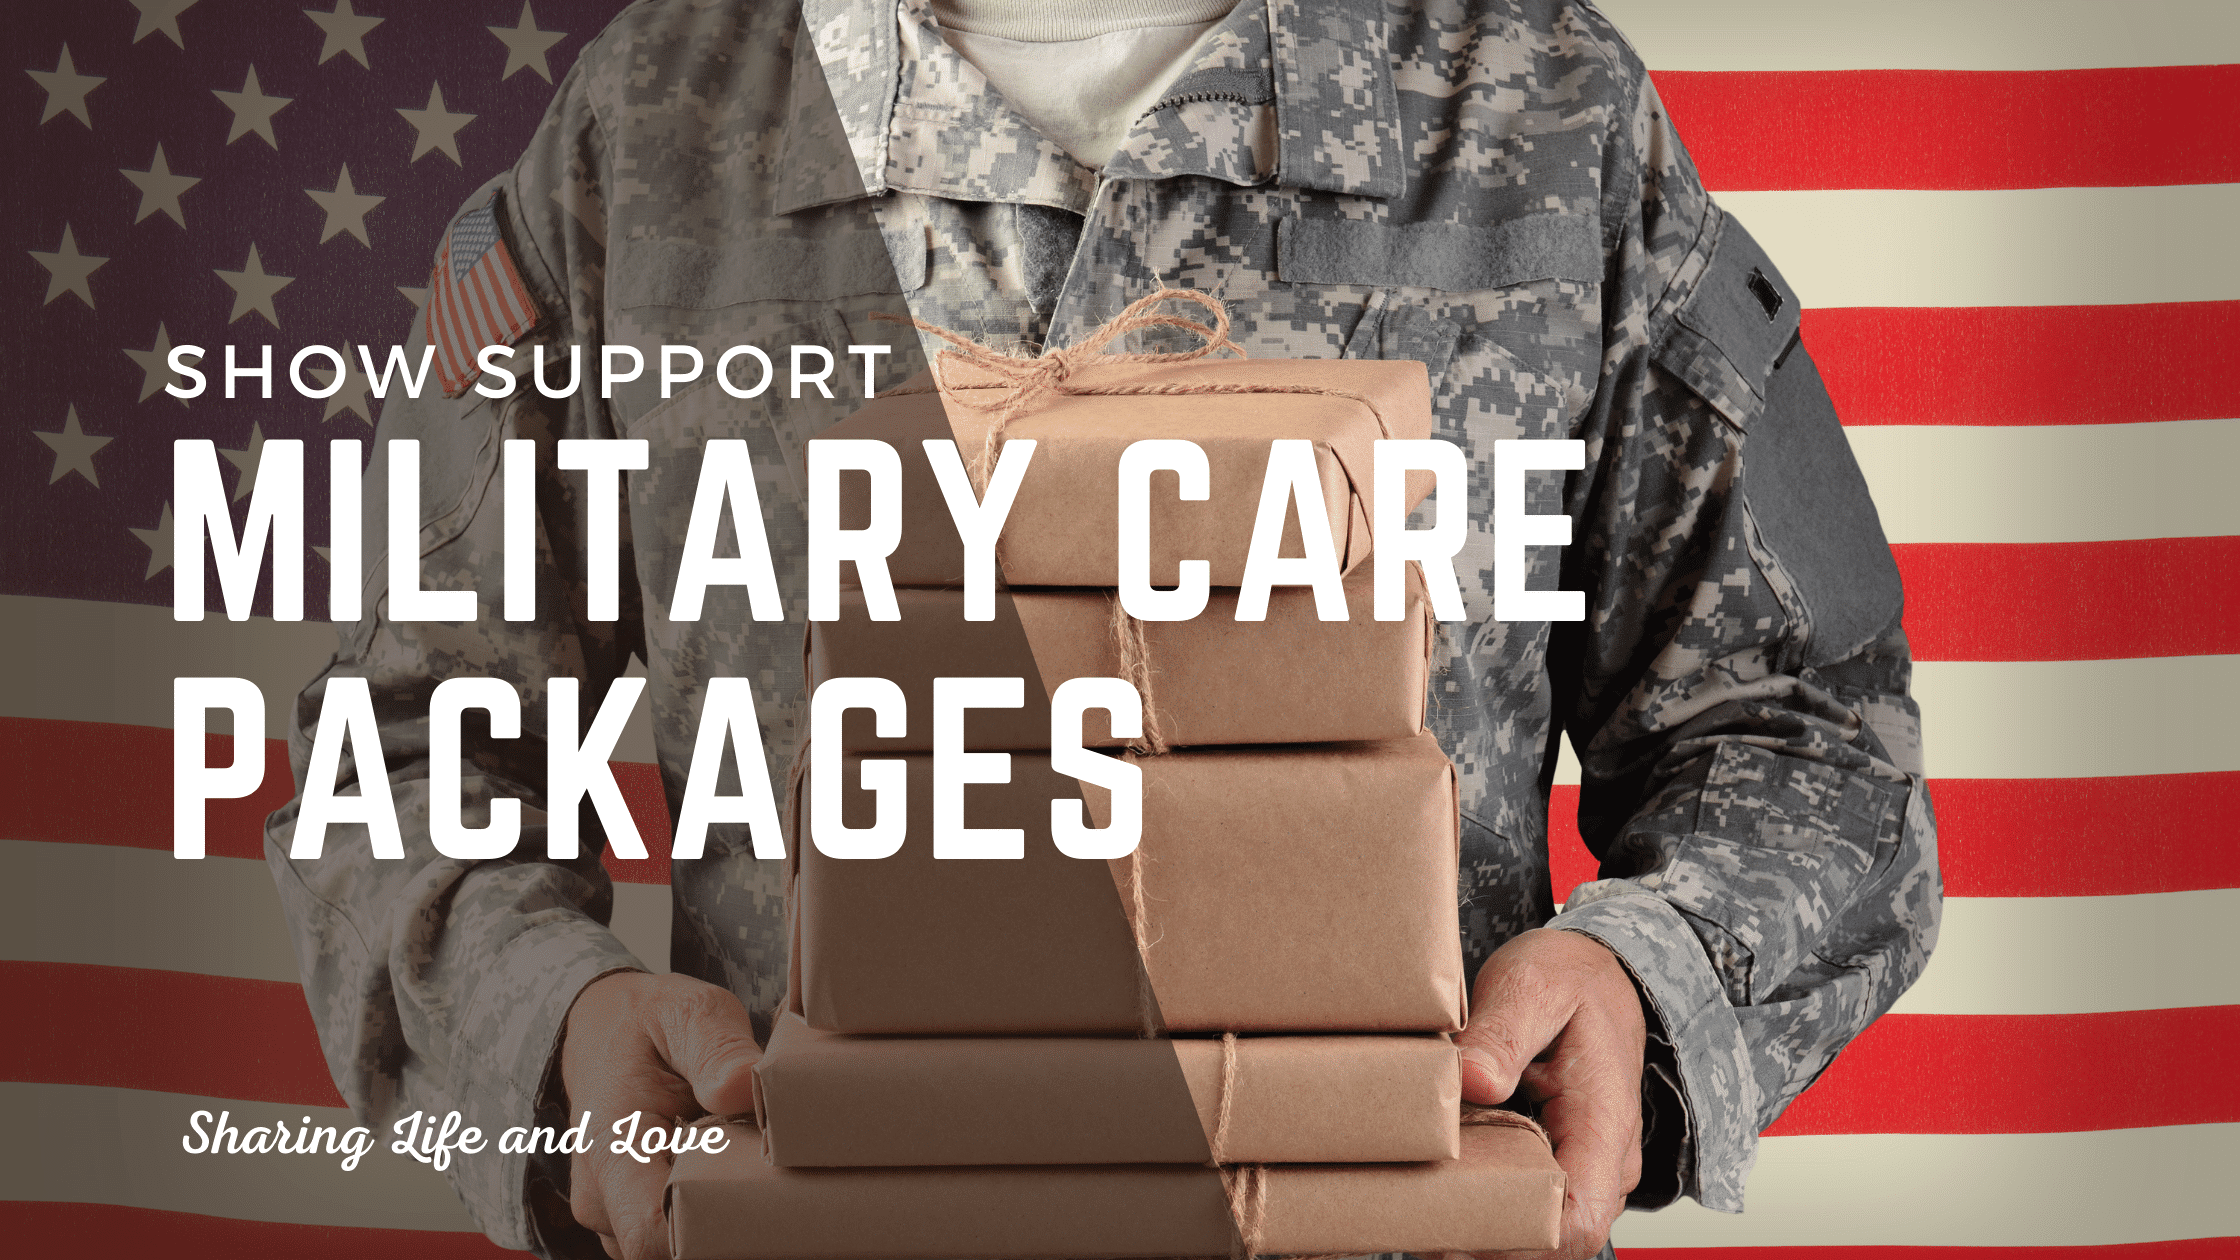 Military Care Packages A Unique Way To Show Support Sharing Life And